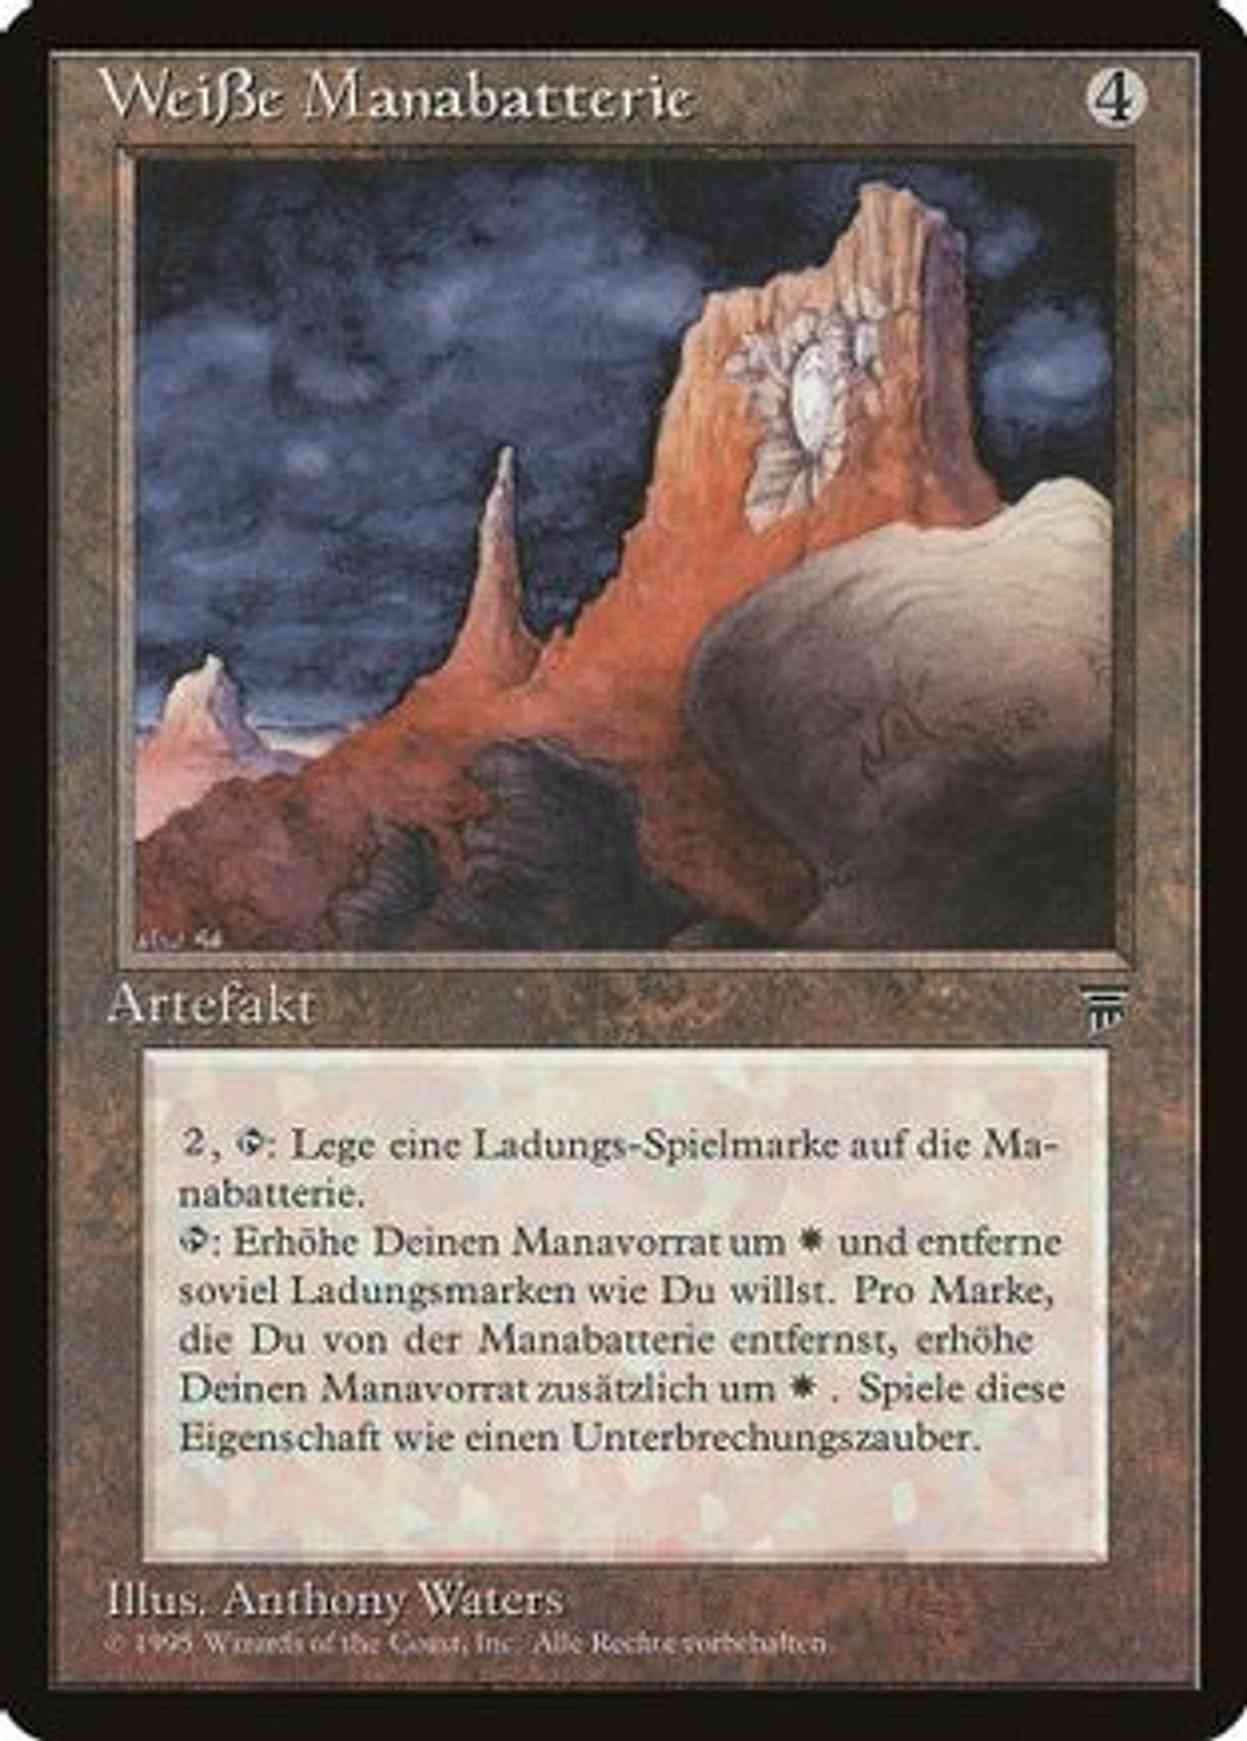 White Mana Battery (German) - "WeiBe Manabatterie" magic card front